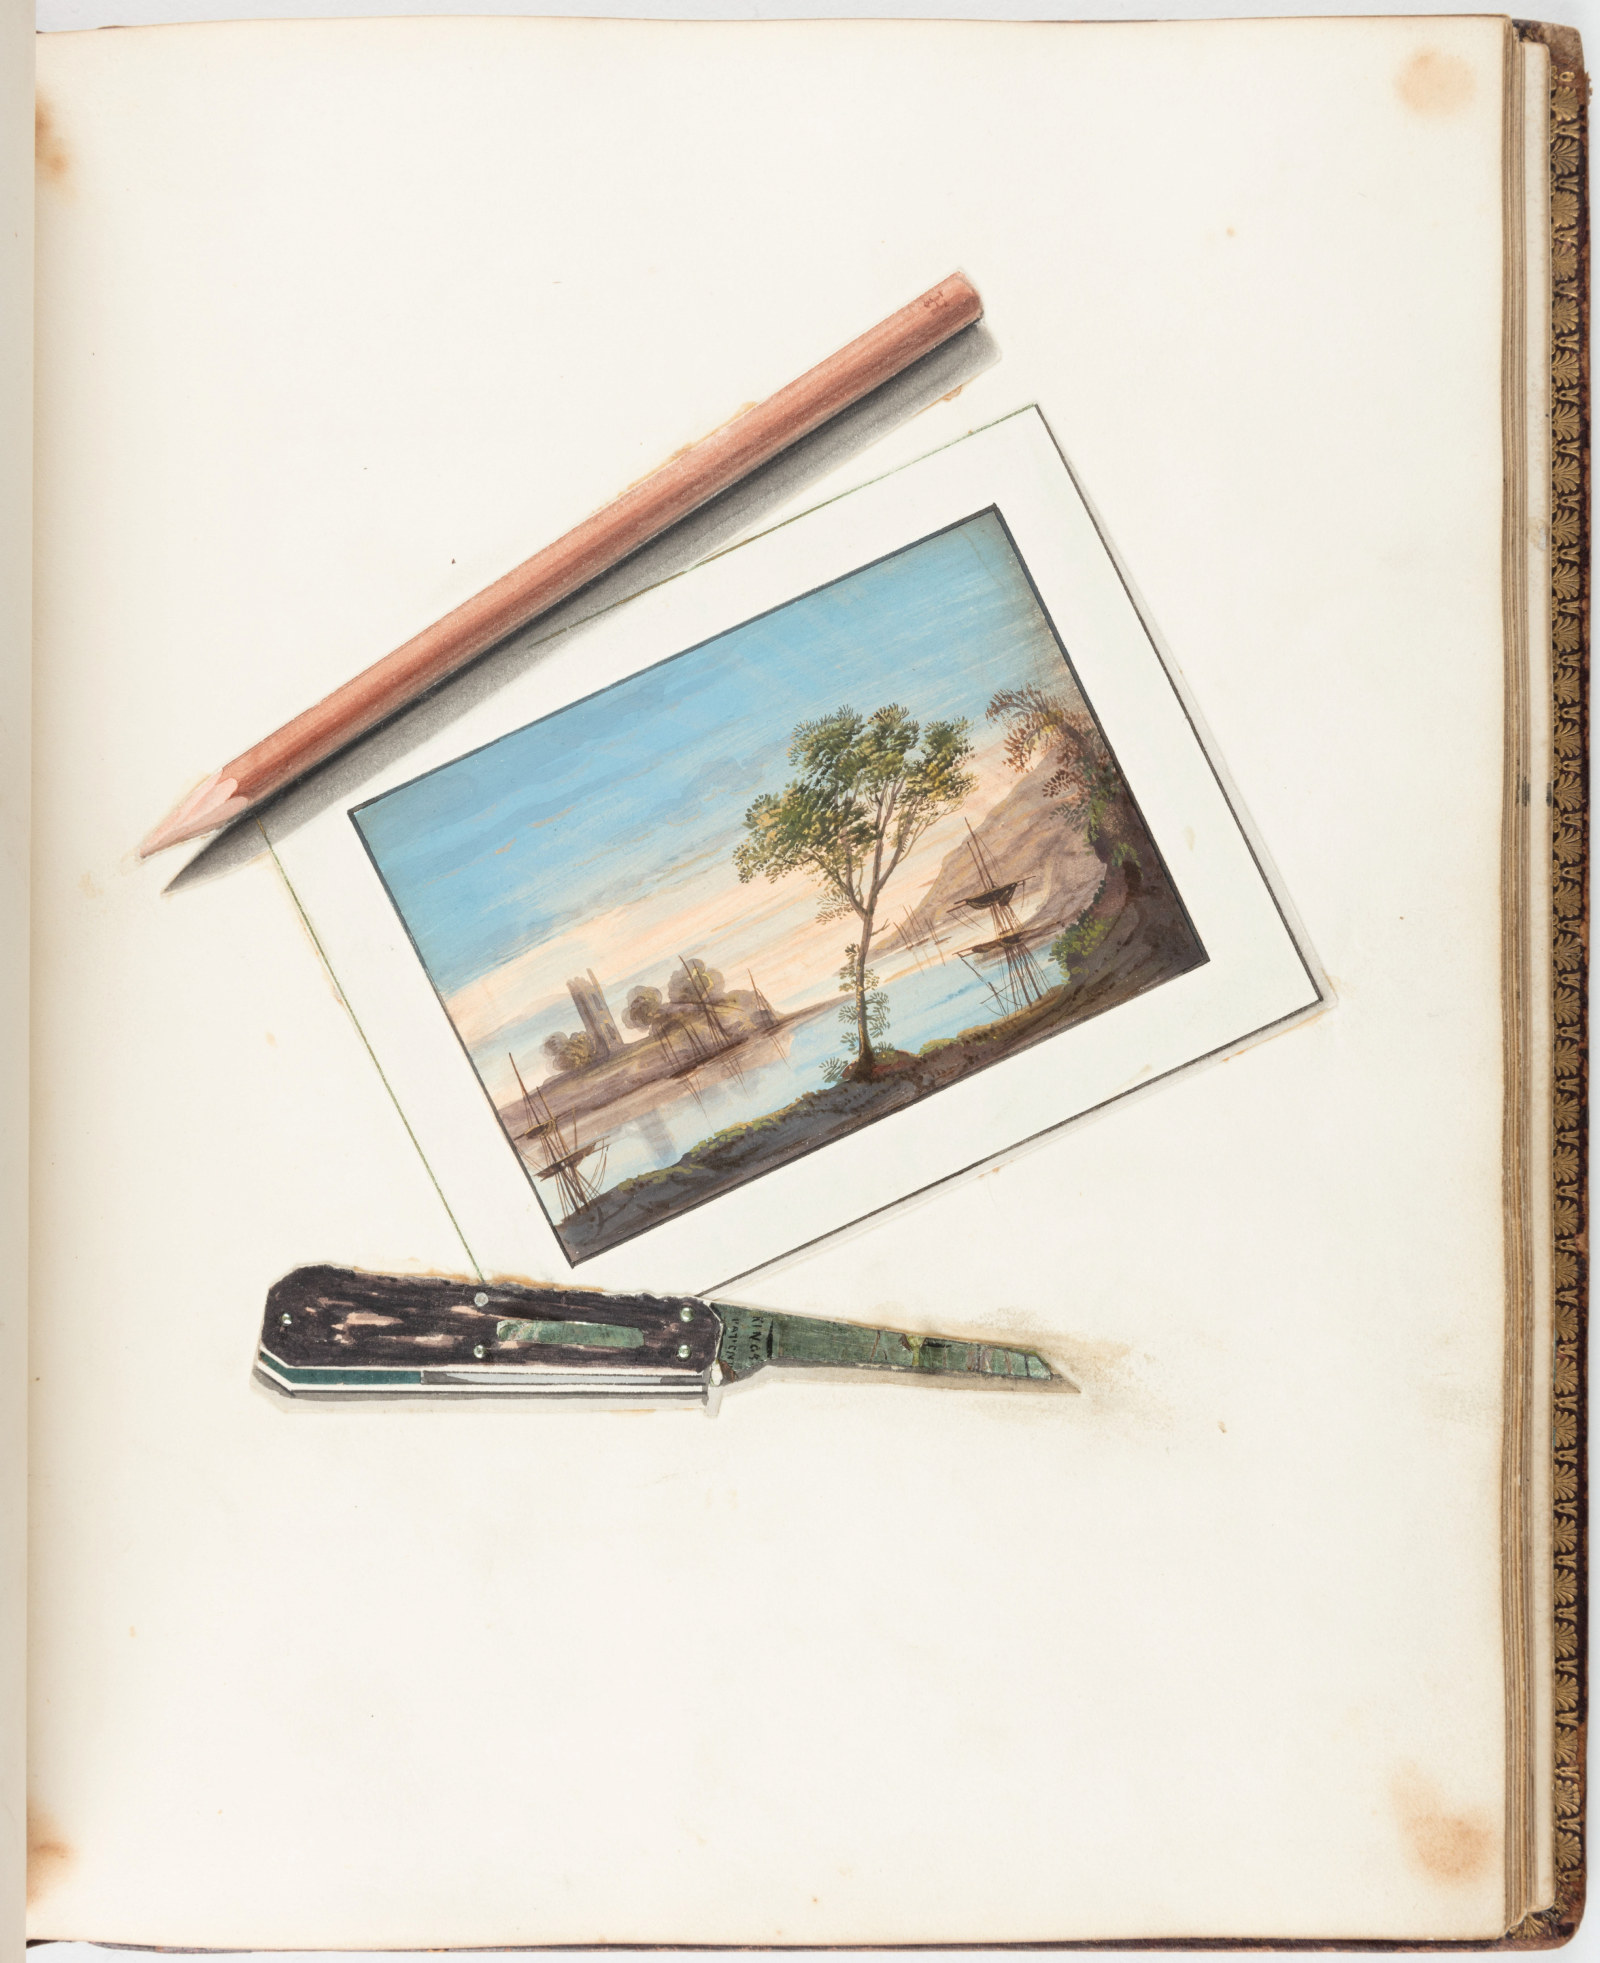 Illustration of a postcard showing an idylic water view and pencil placed nearby